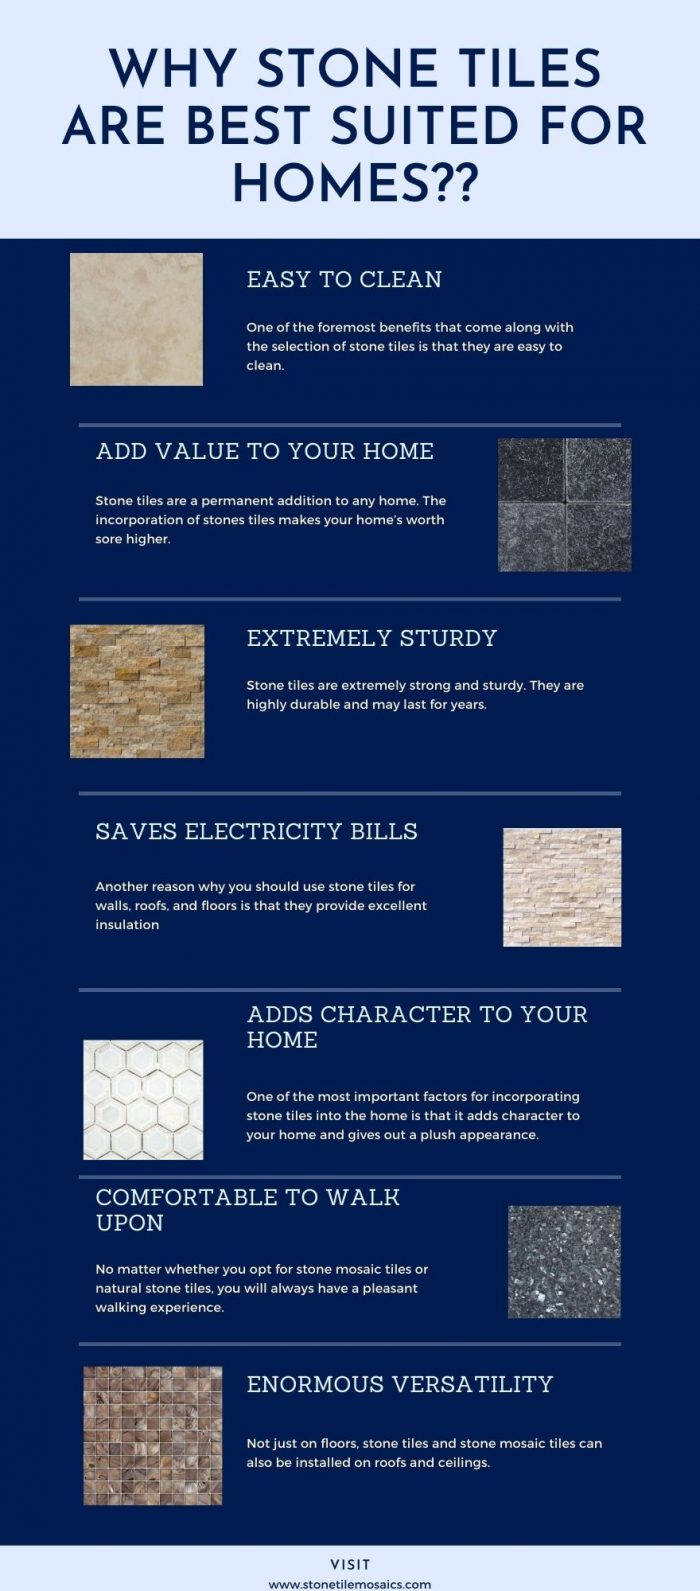 WHY STONE TILES ARE BEST SUITED FOR HOMES??